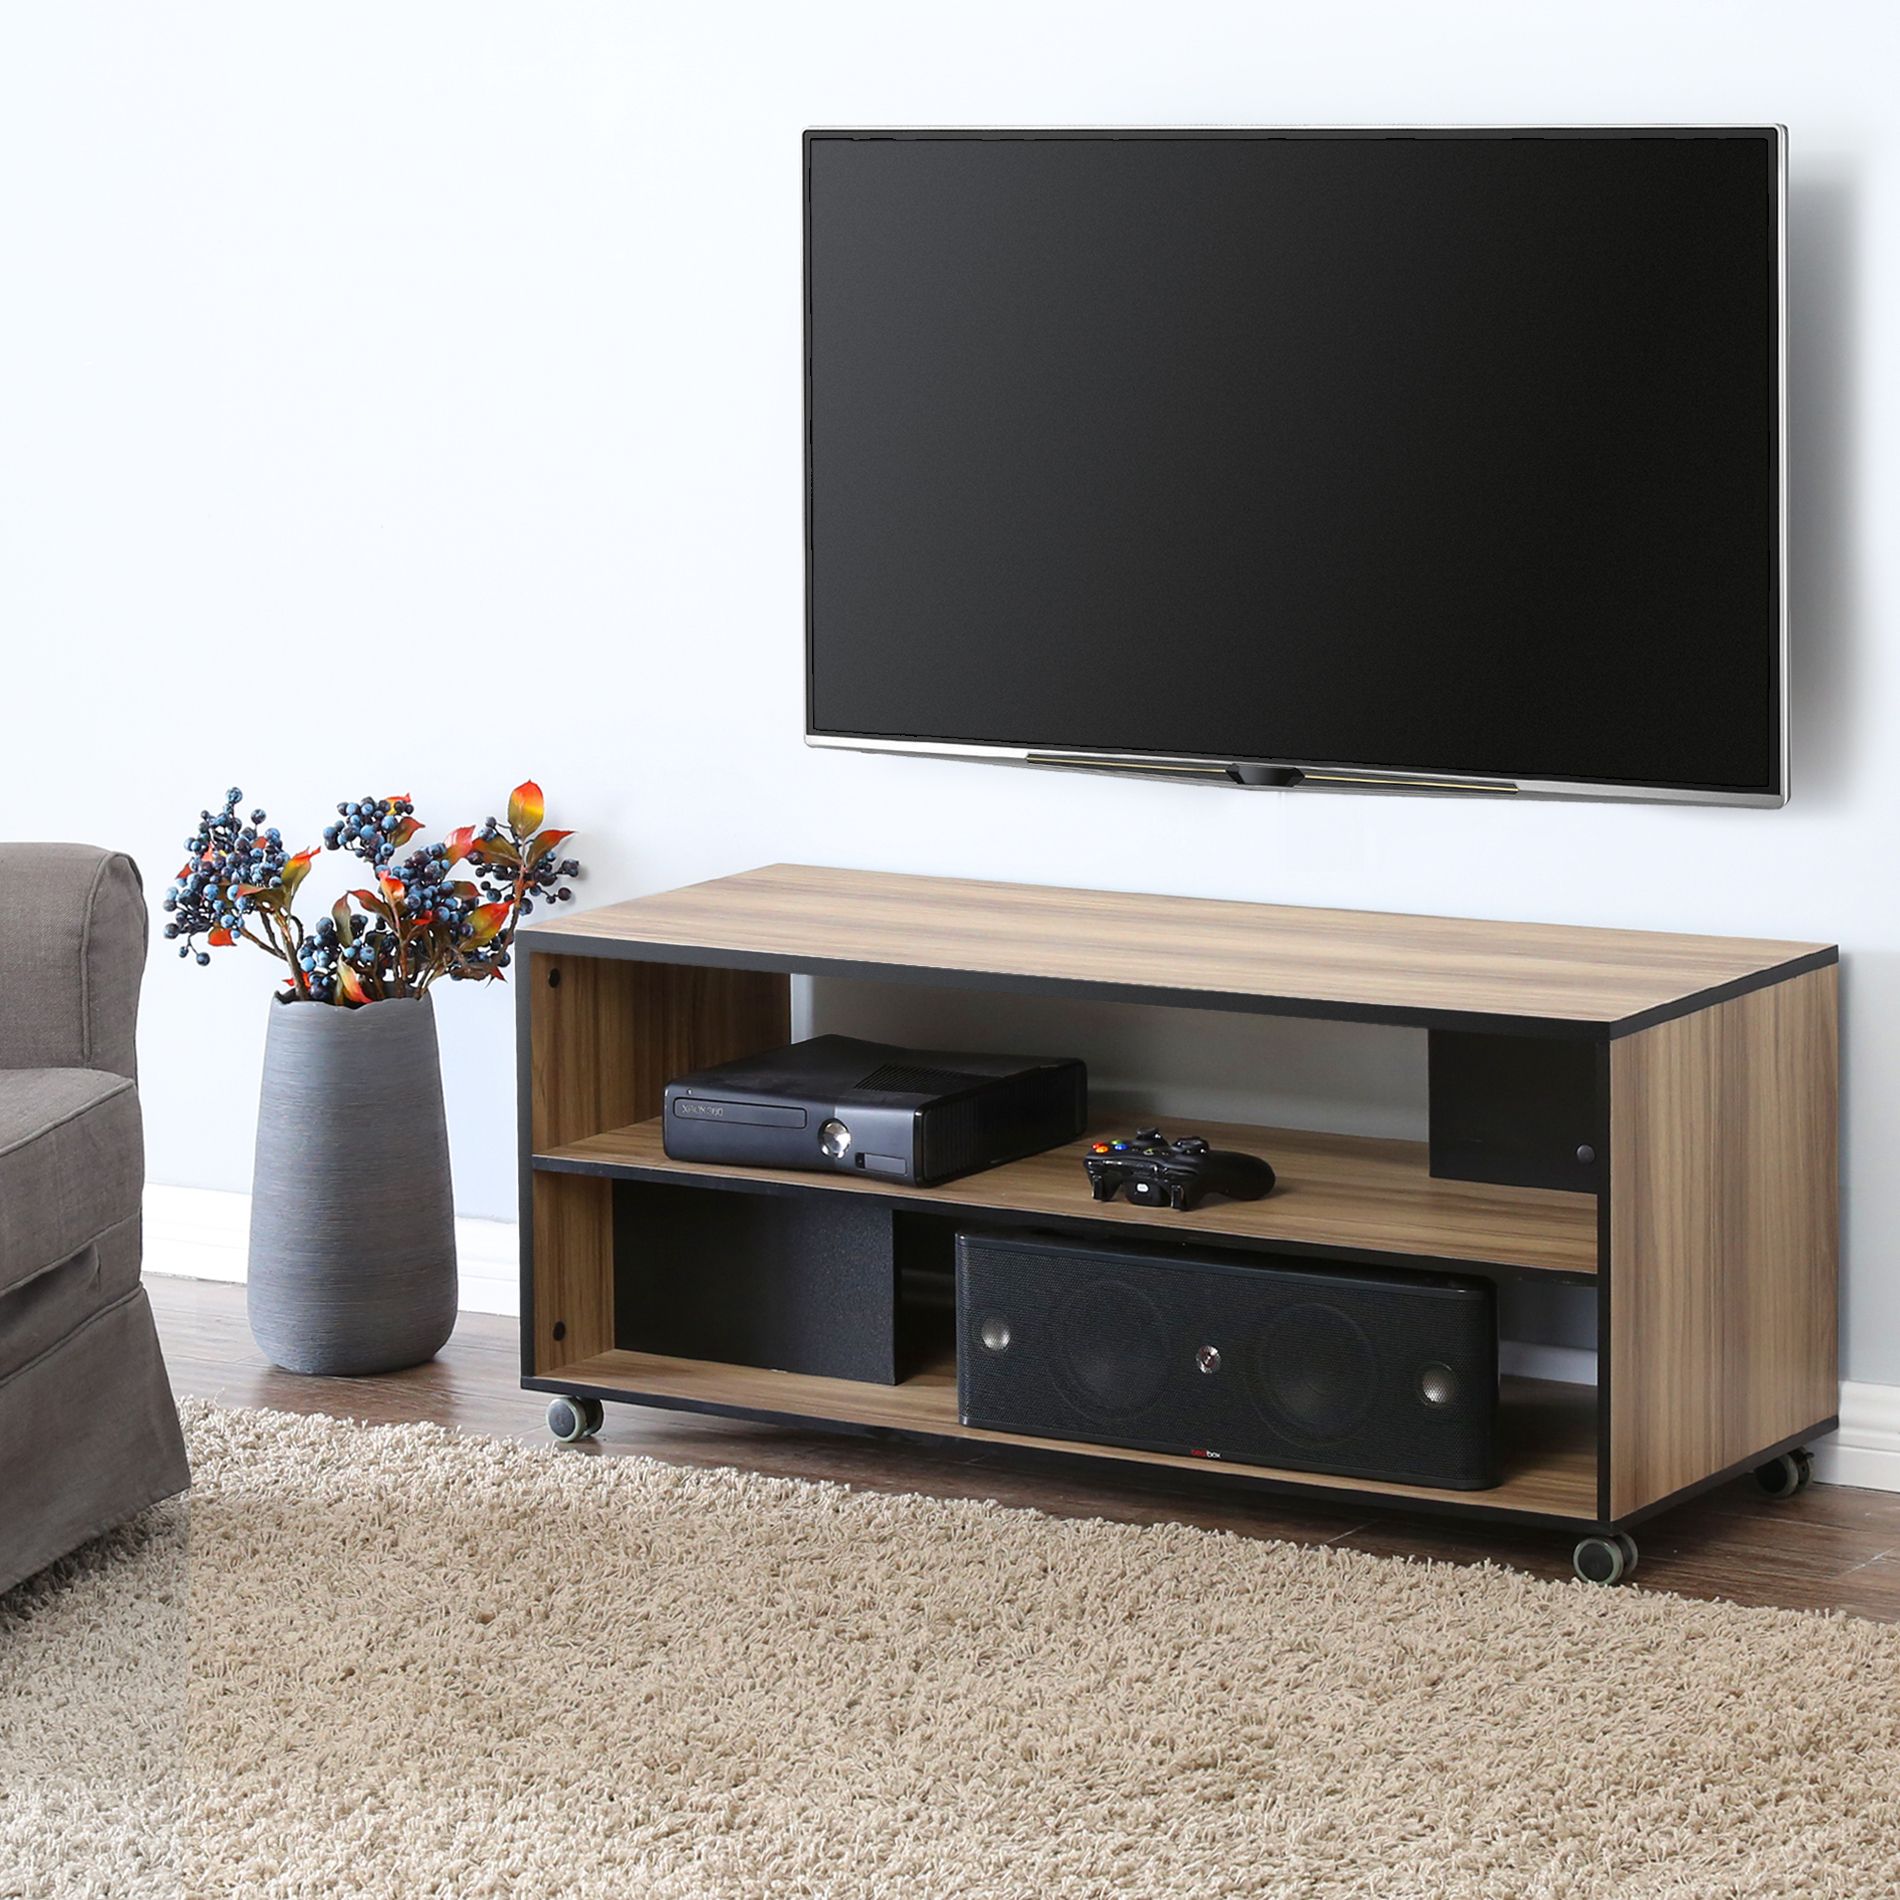 Fitueyes Wood Tv Stand Storage Console With Wheels For 23 Within Wooden Tv Stands For 50 Inch Tv (View 6 of 15)